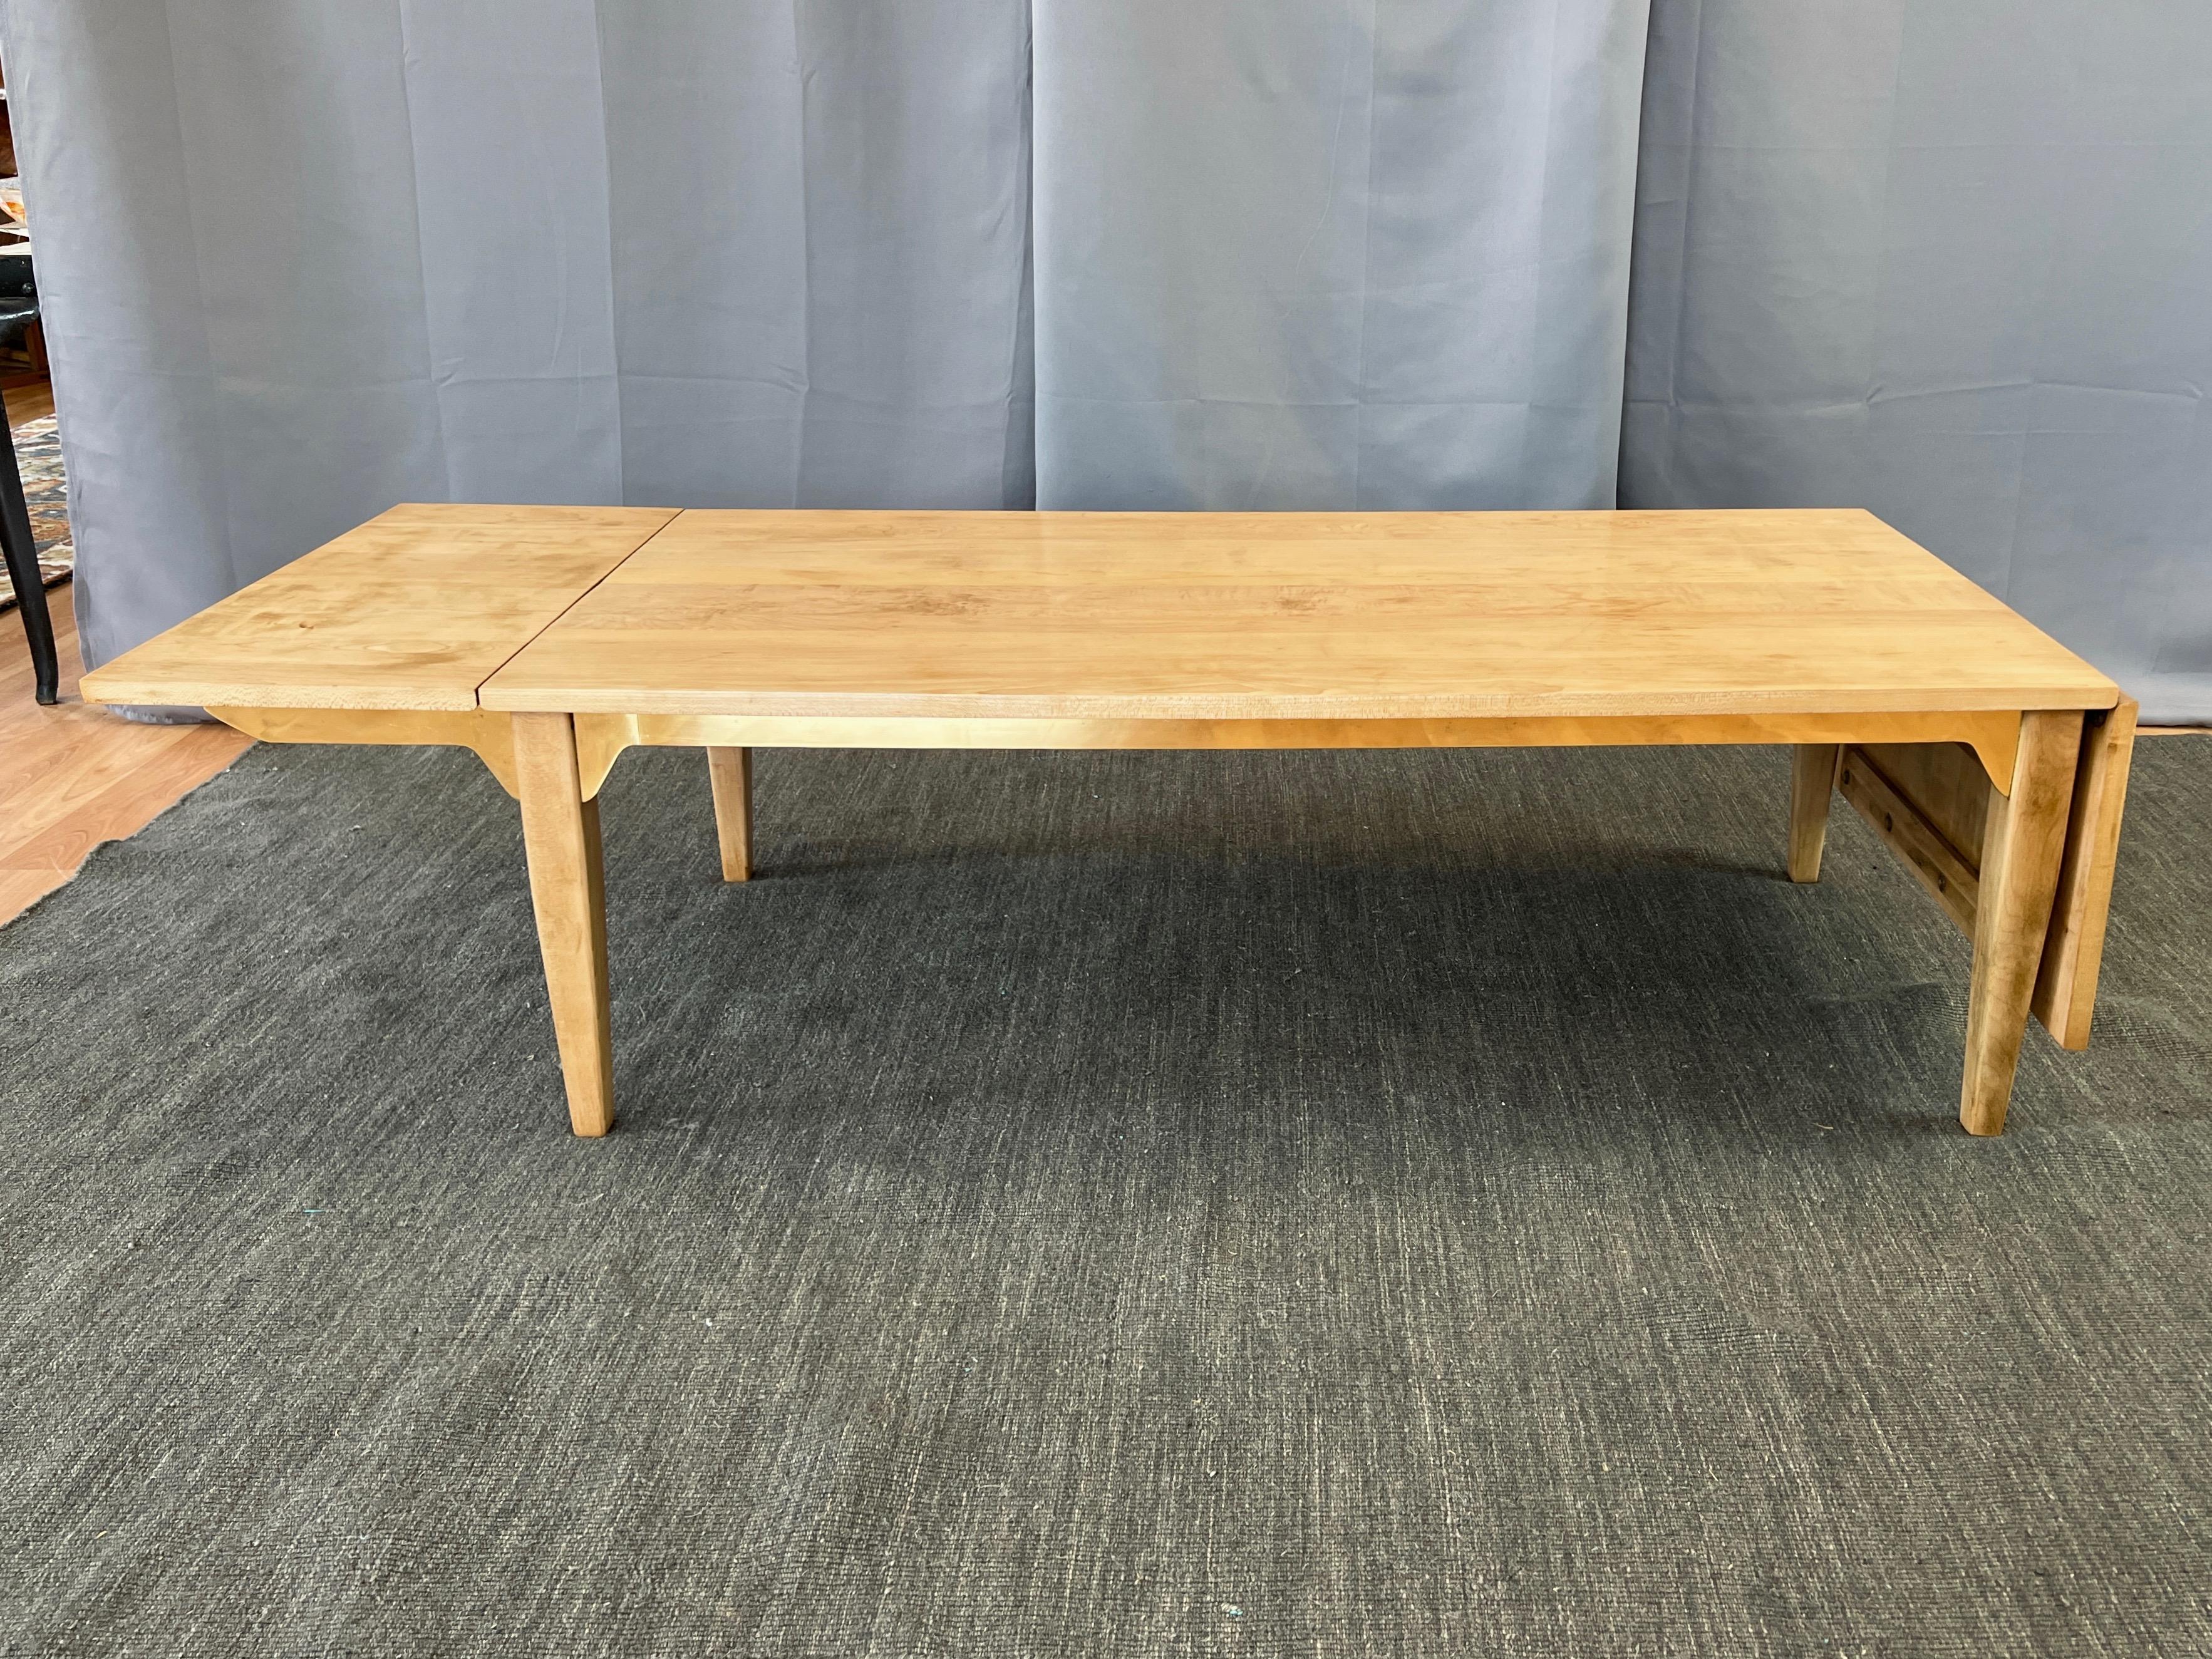 A rare 1953 birch and brass drop-leaf coffee table by Milo Baughman for Murray Furniture.

Solid birch construction with dynamic figuring throughout, especially notable on a top section. Features gleaming blade-like brass aprons and swing-out